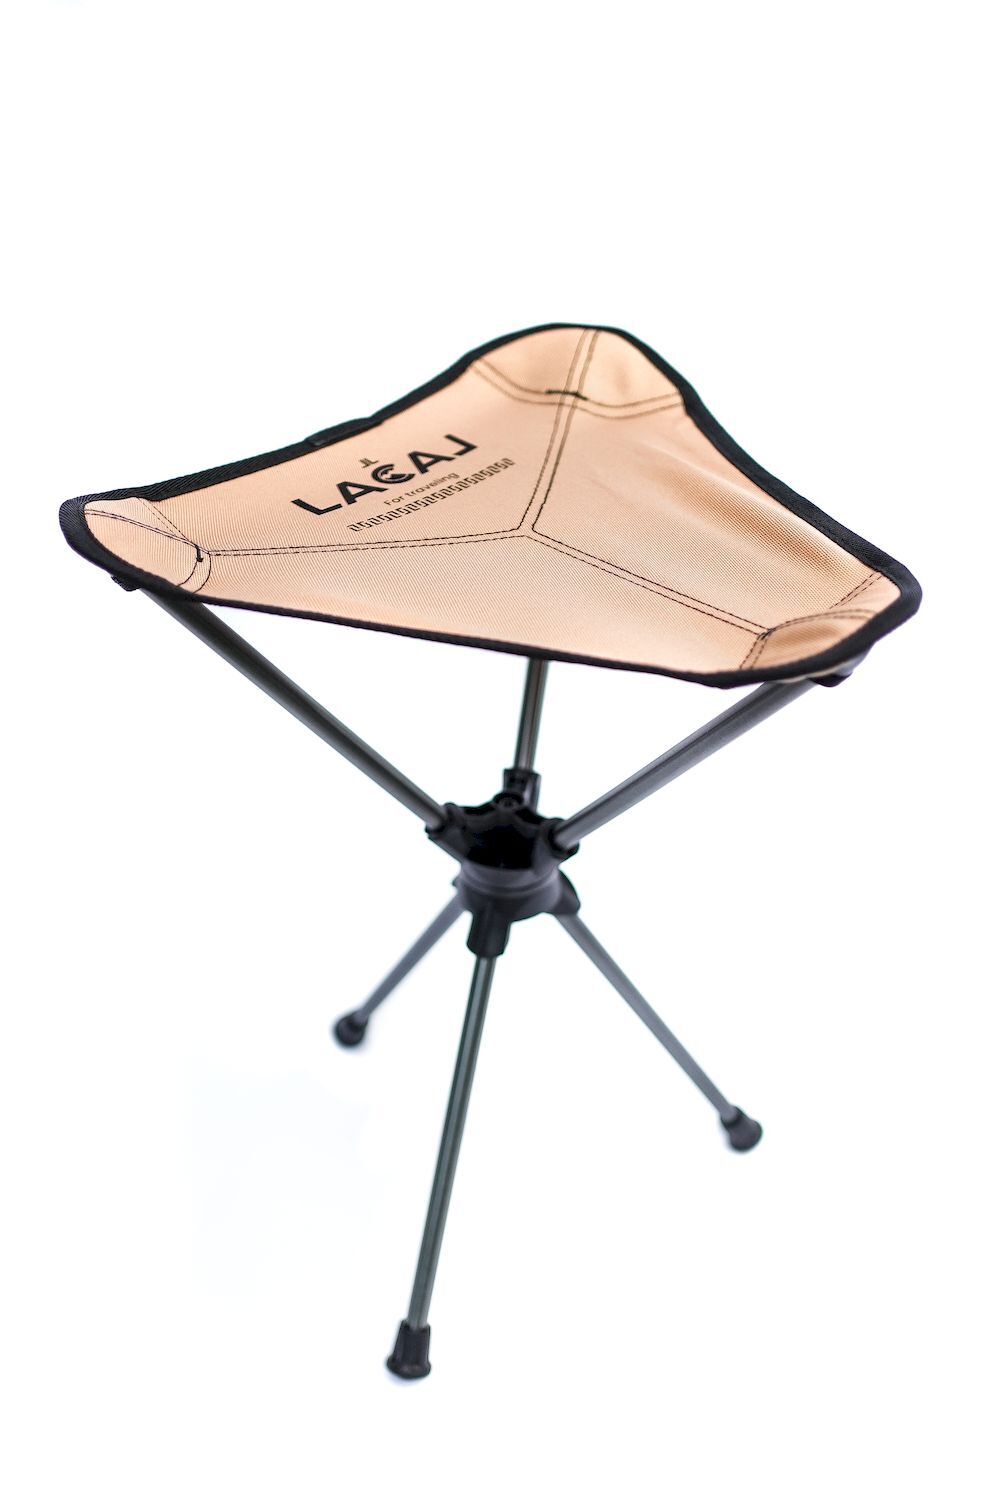 Lacal Nomad Stool - Campingstol